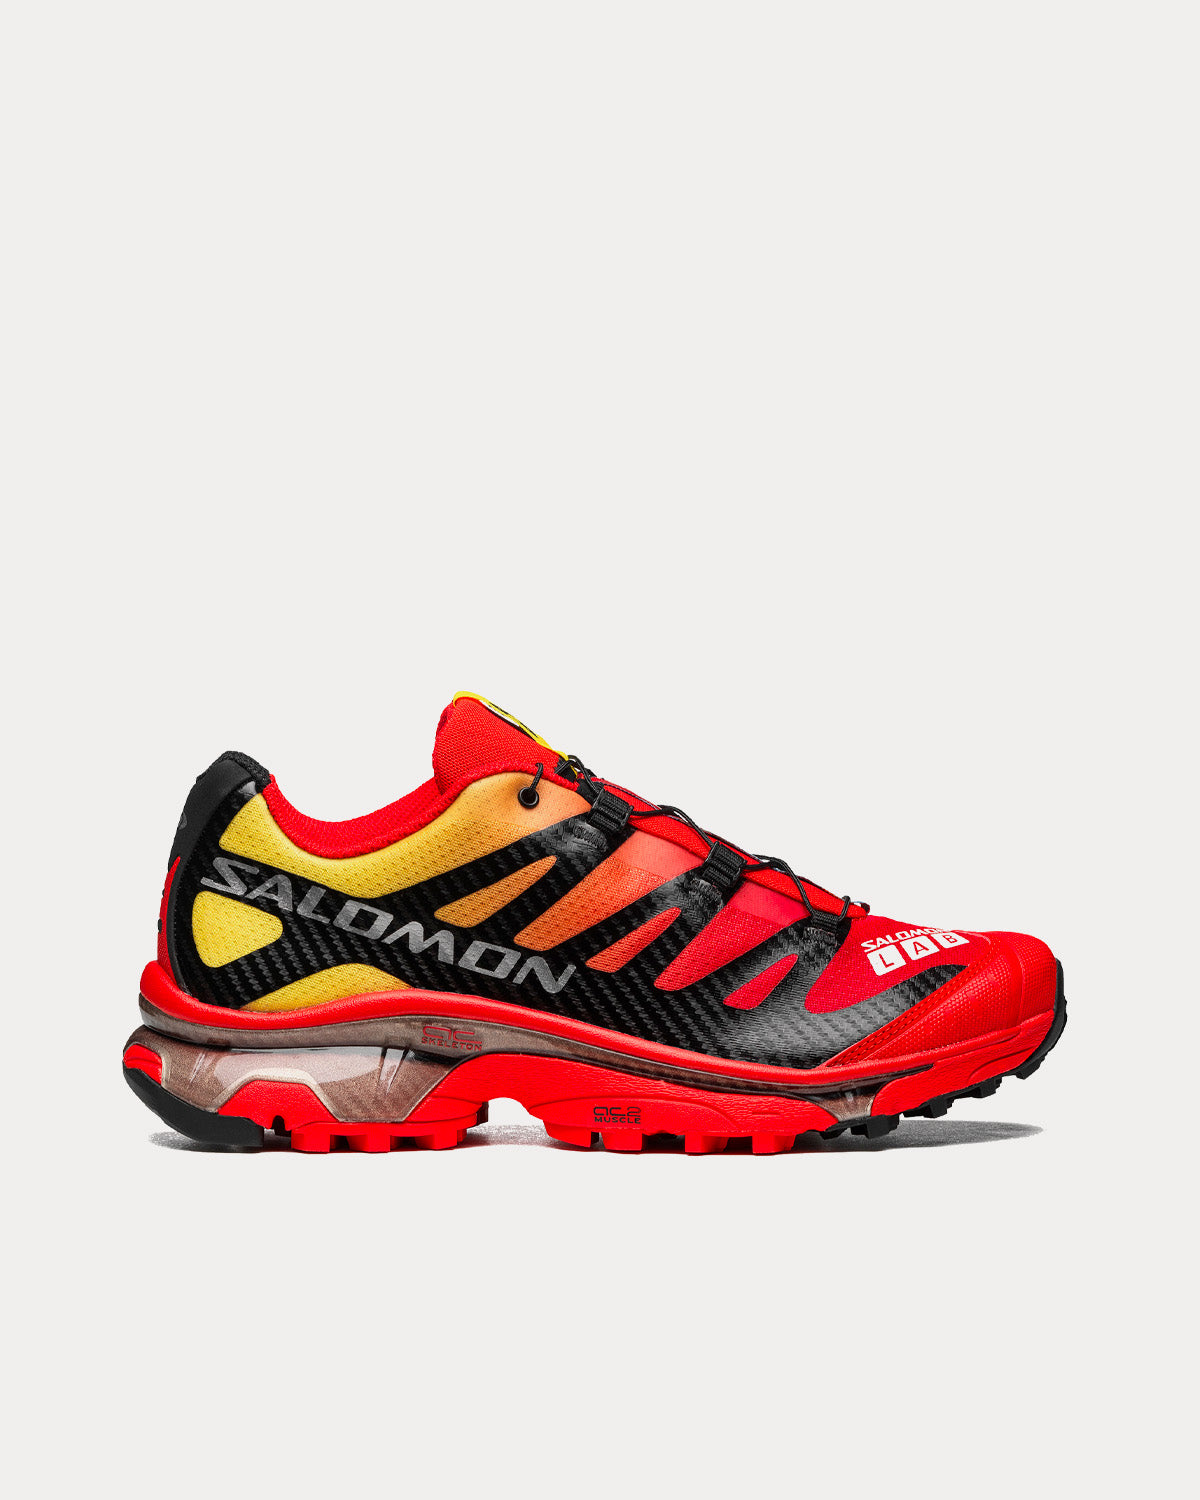 XT-4 OG Fiery Red / Black / Empire Yellow Low Top Sneakers